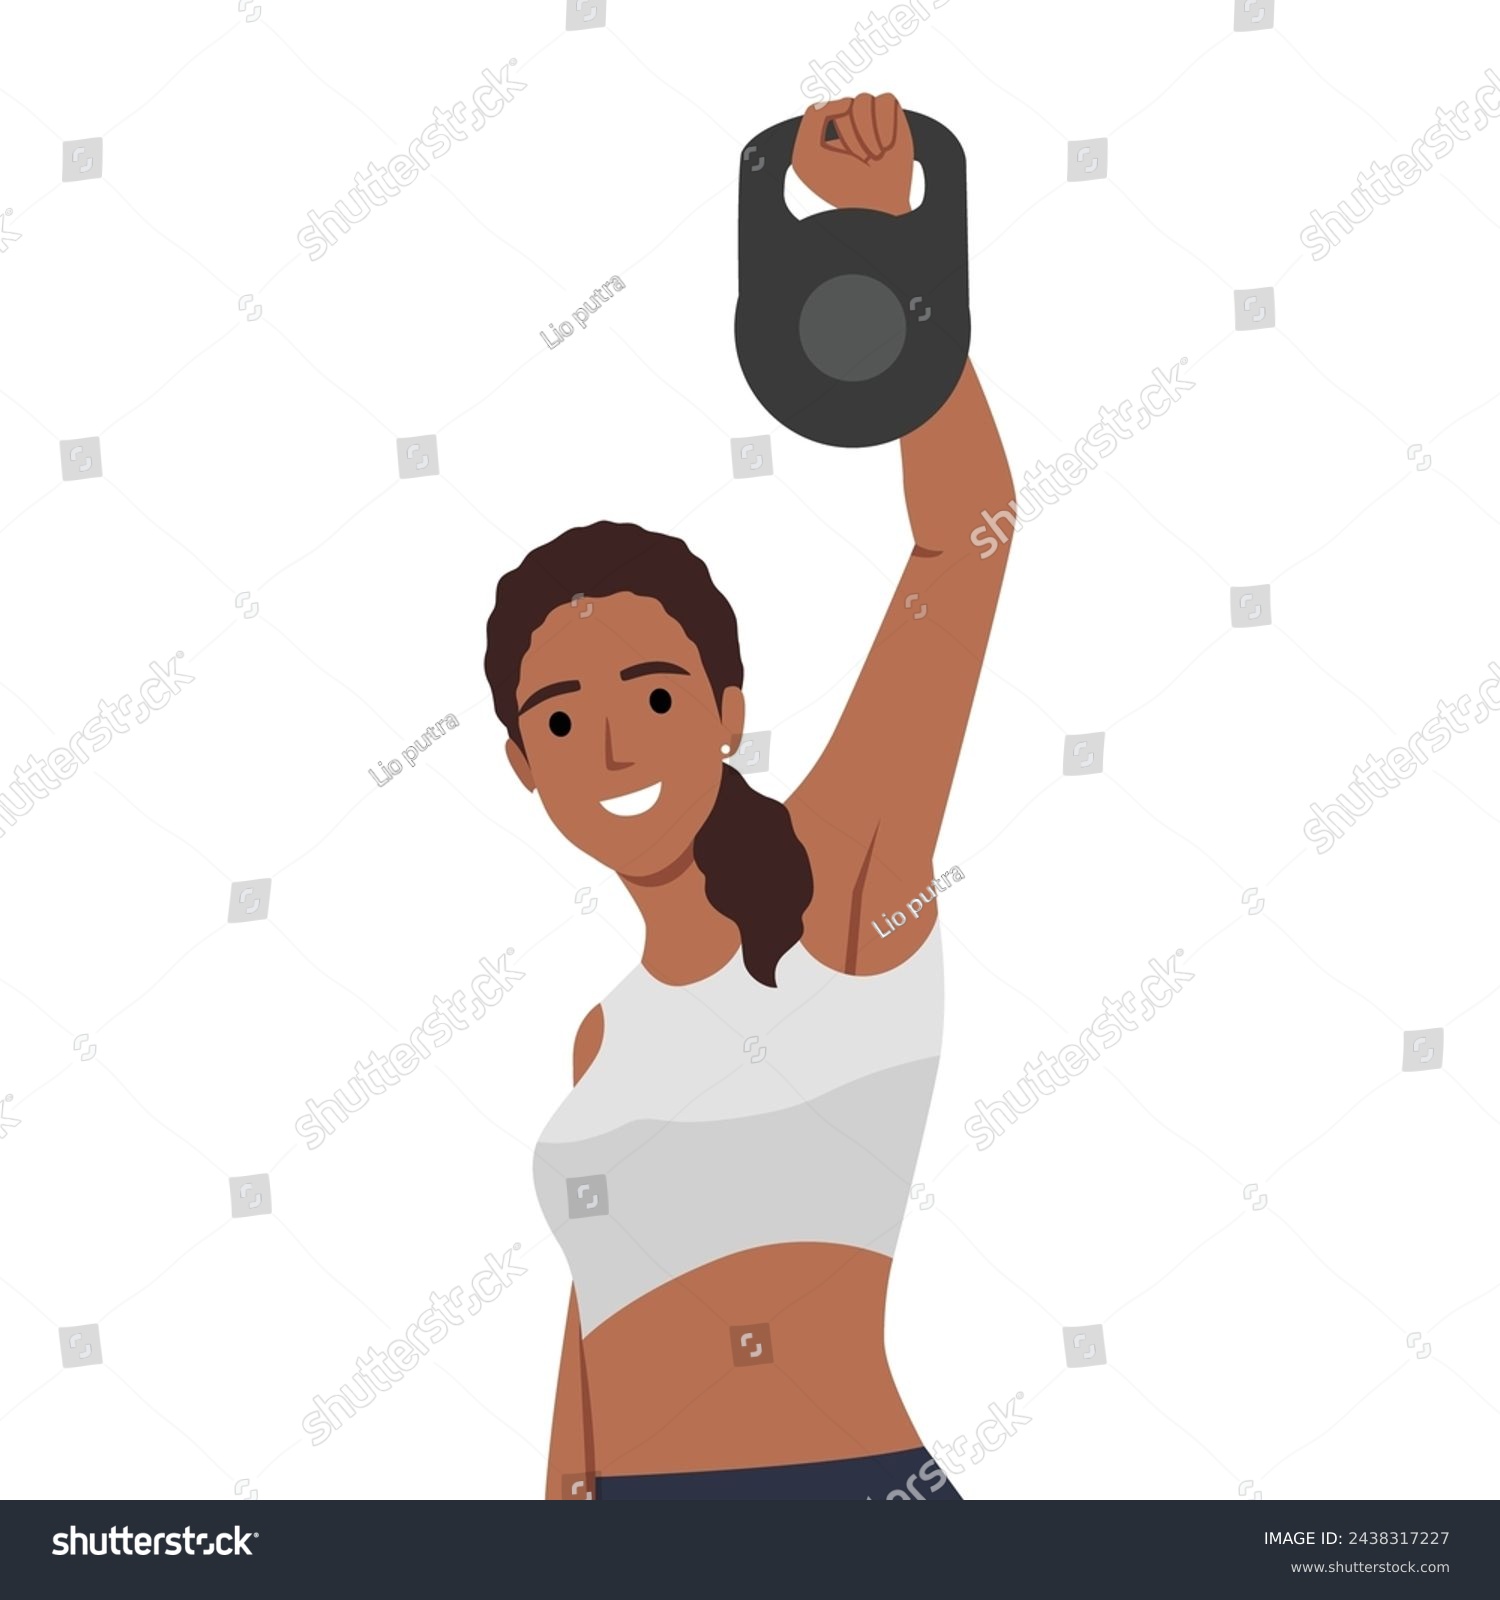 SVG of Woman doing Single arm kettlebell snatch workout exercise. Flat vector illustration isolated on white background. workout character set svg